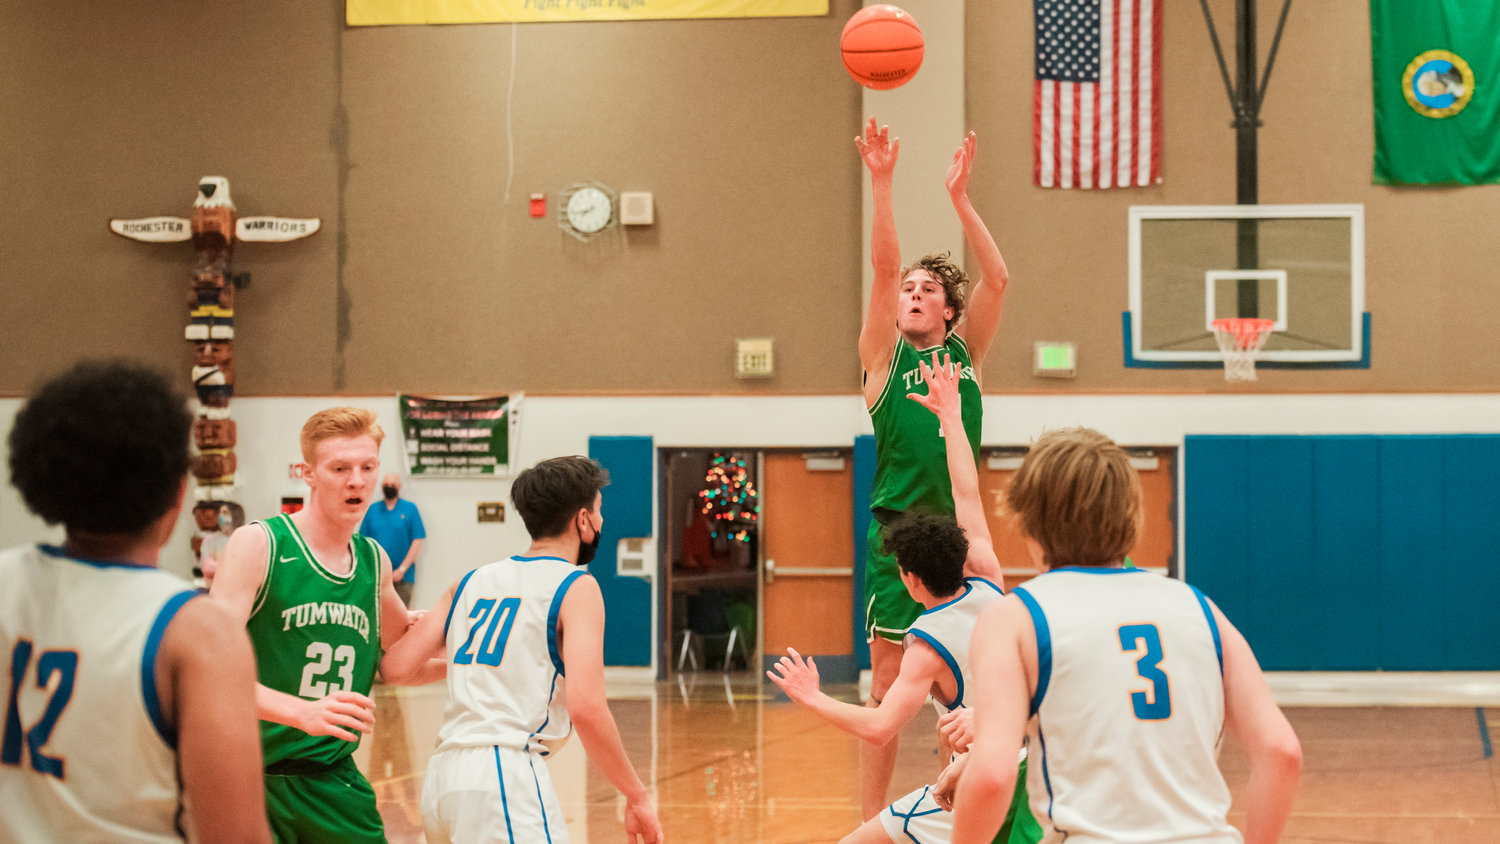 Tumwater’s Luke Brewer (11) makes a three-point shot during a game against Rochester Wednesday night.